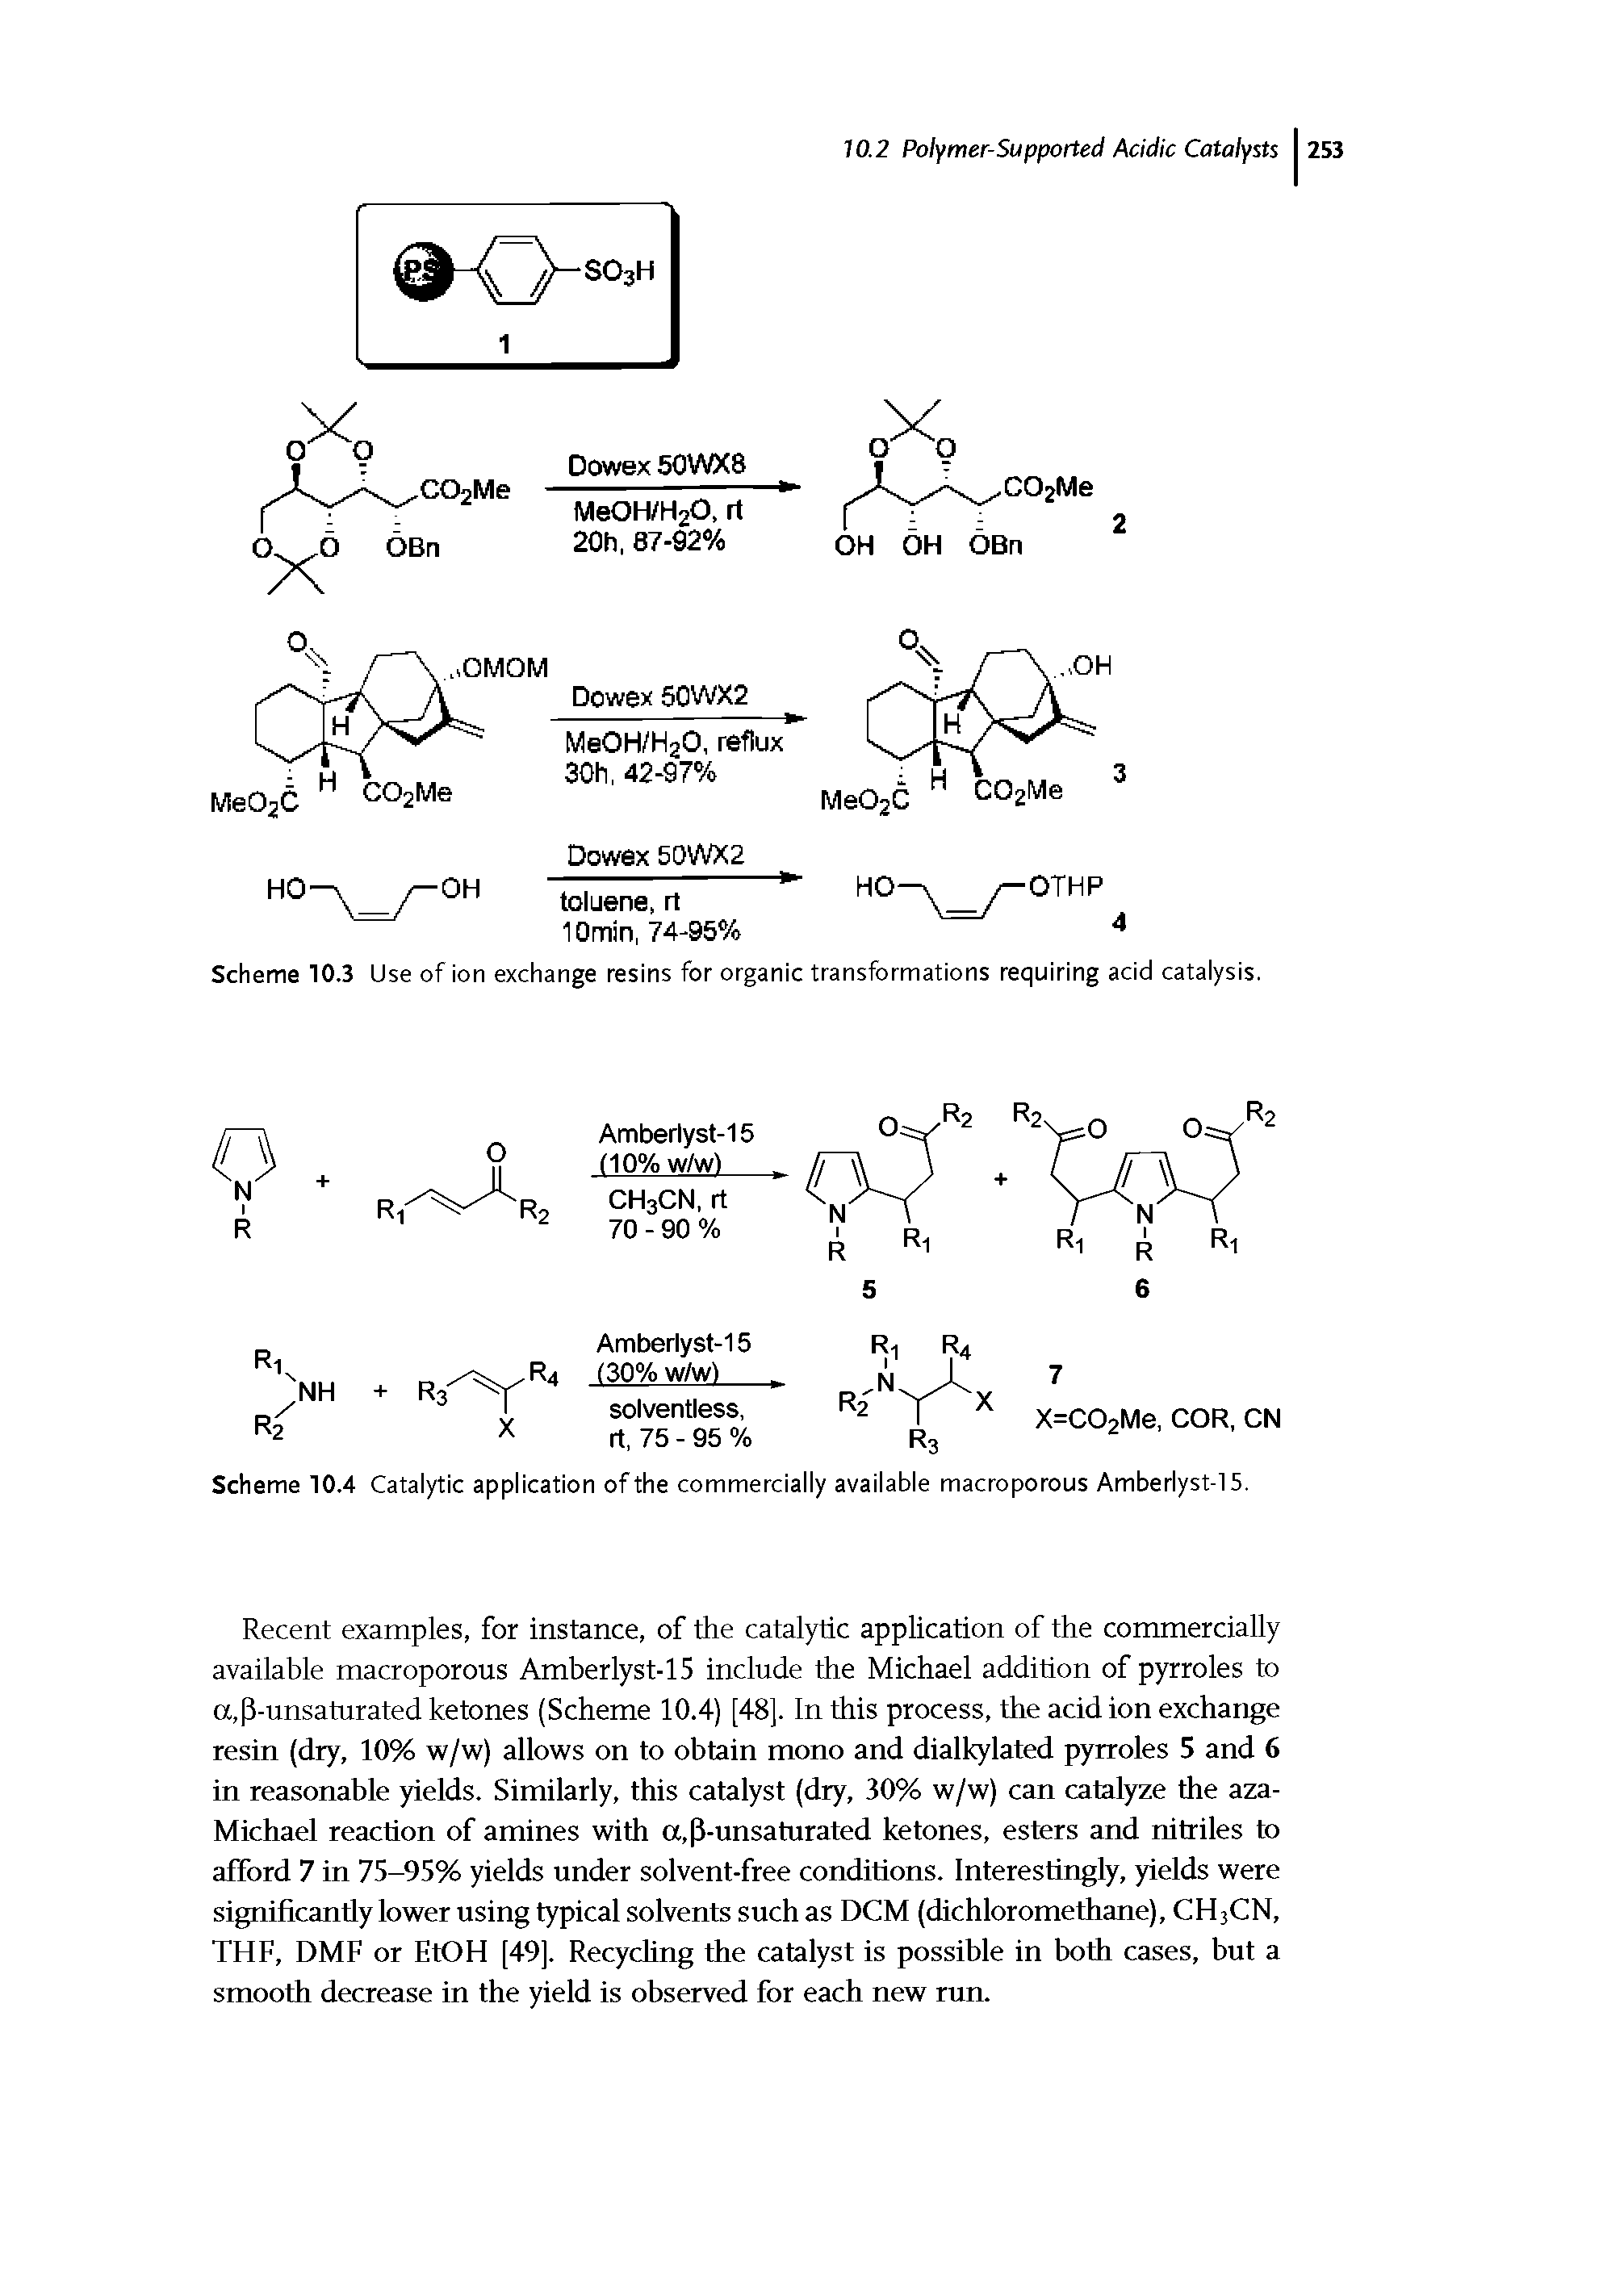 Scheme 10.4 Catalytic application of the commercially available macroporous Amberlyst-15.